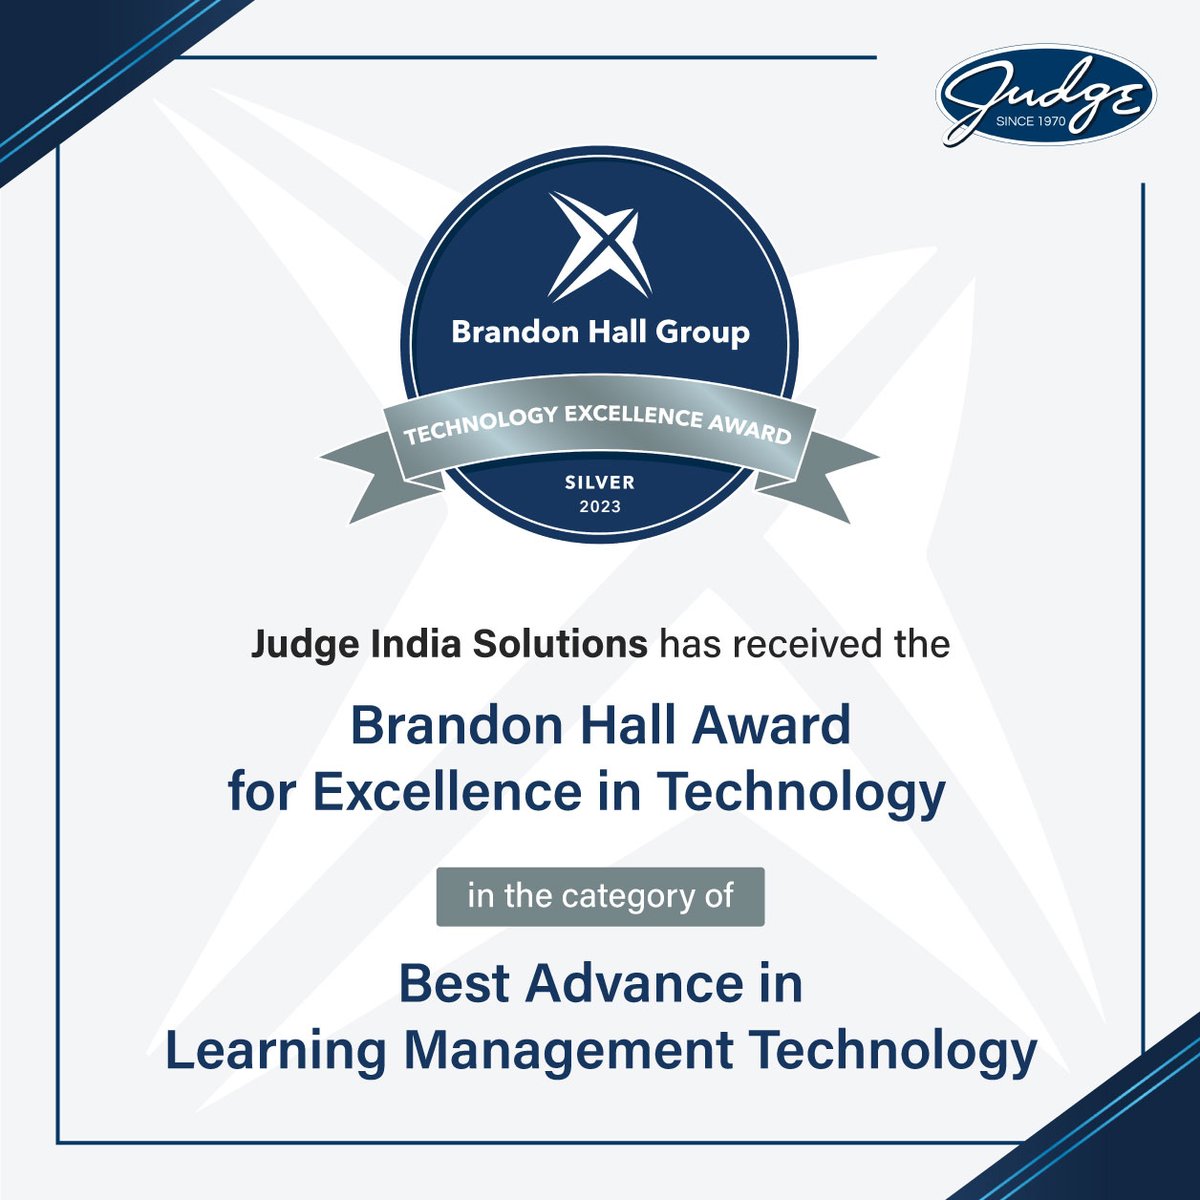 #BHGAwards
We feel ecstatic to announce that Judge India Solutions has clinched the prestigious @BrandonHallGrp Award for Excellence in Technology!

Recognized in the category of Best Advance in Learning Management Technology, this achievement acknowledges our commitment to